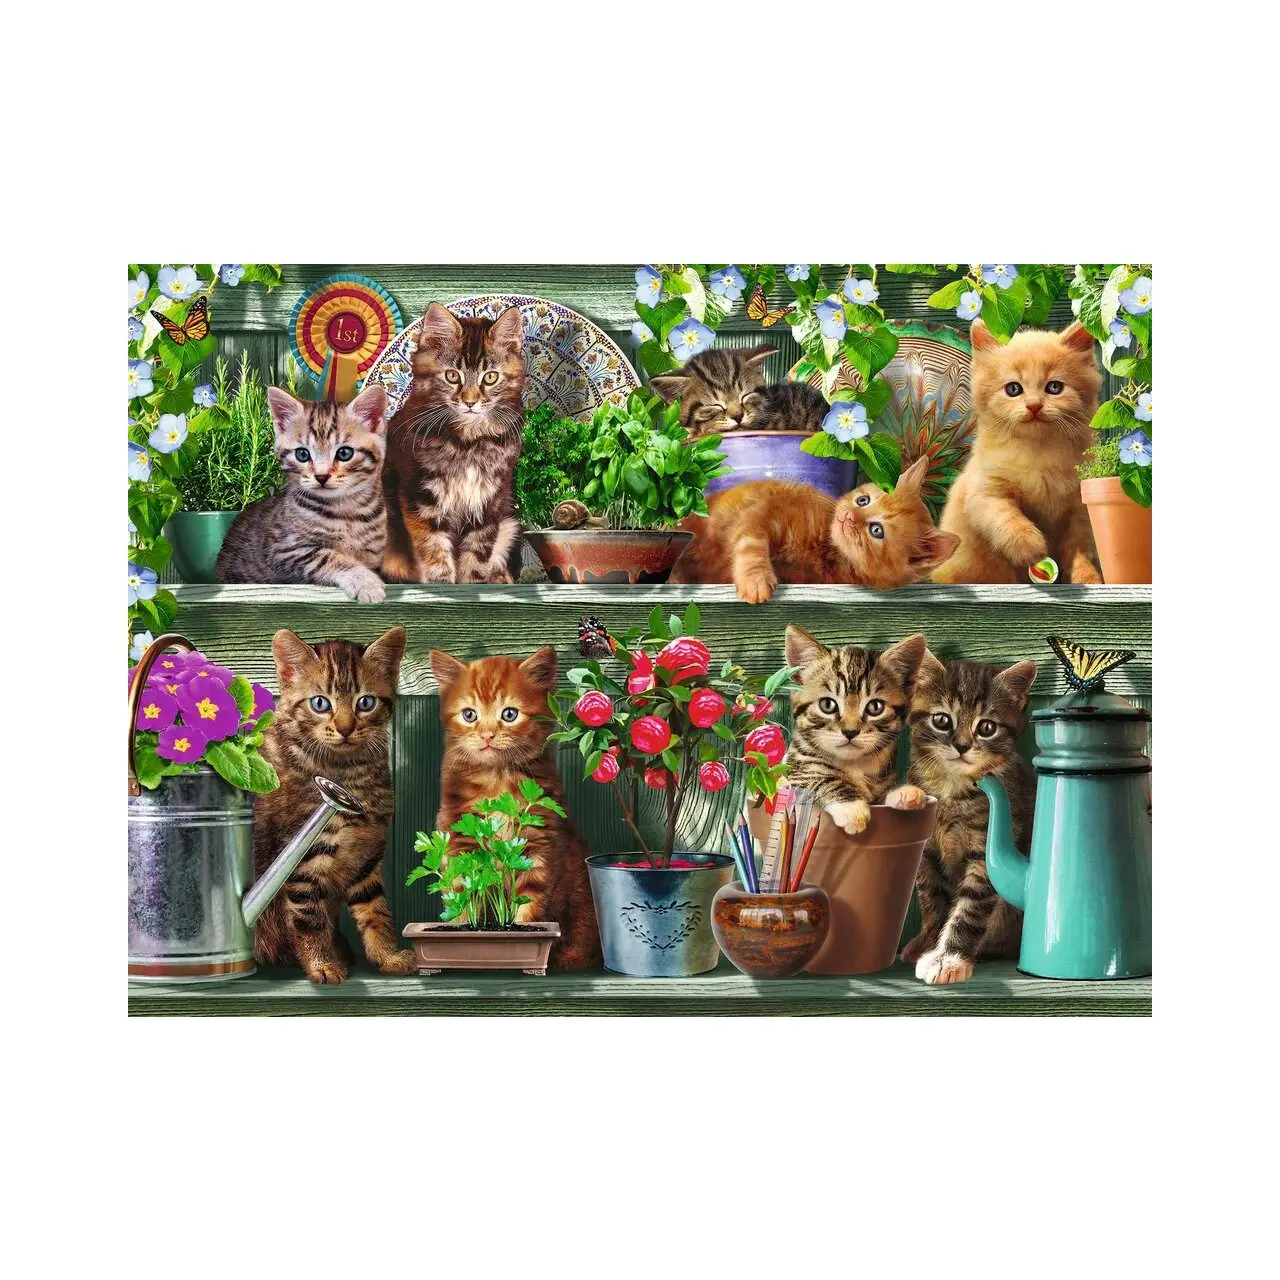 Teile on 500 Puzzle Shelf Cats the